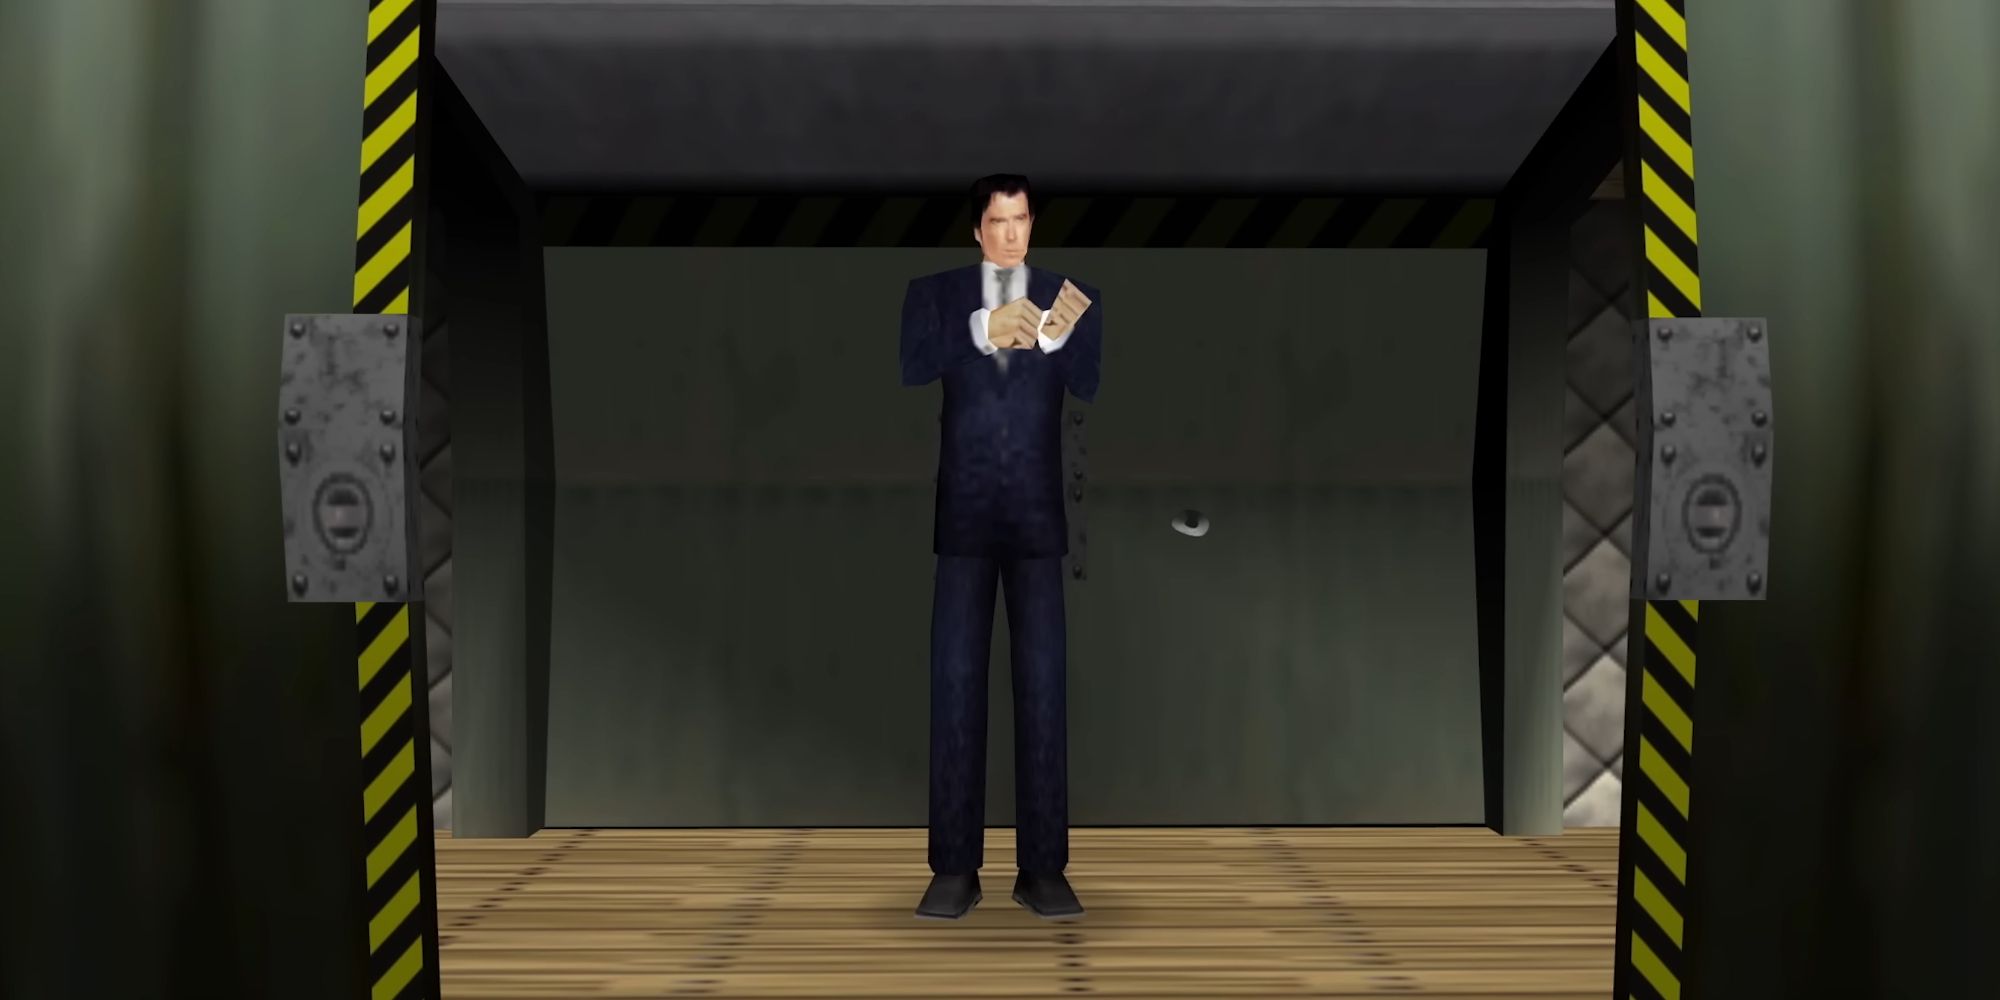 A screenshot from GoldenEye 007 showing James Bond standing and adjusting his suit as blast doors close in front of him.